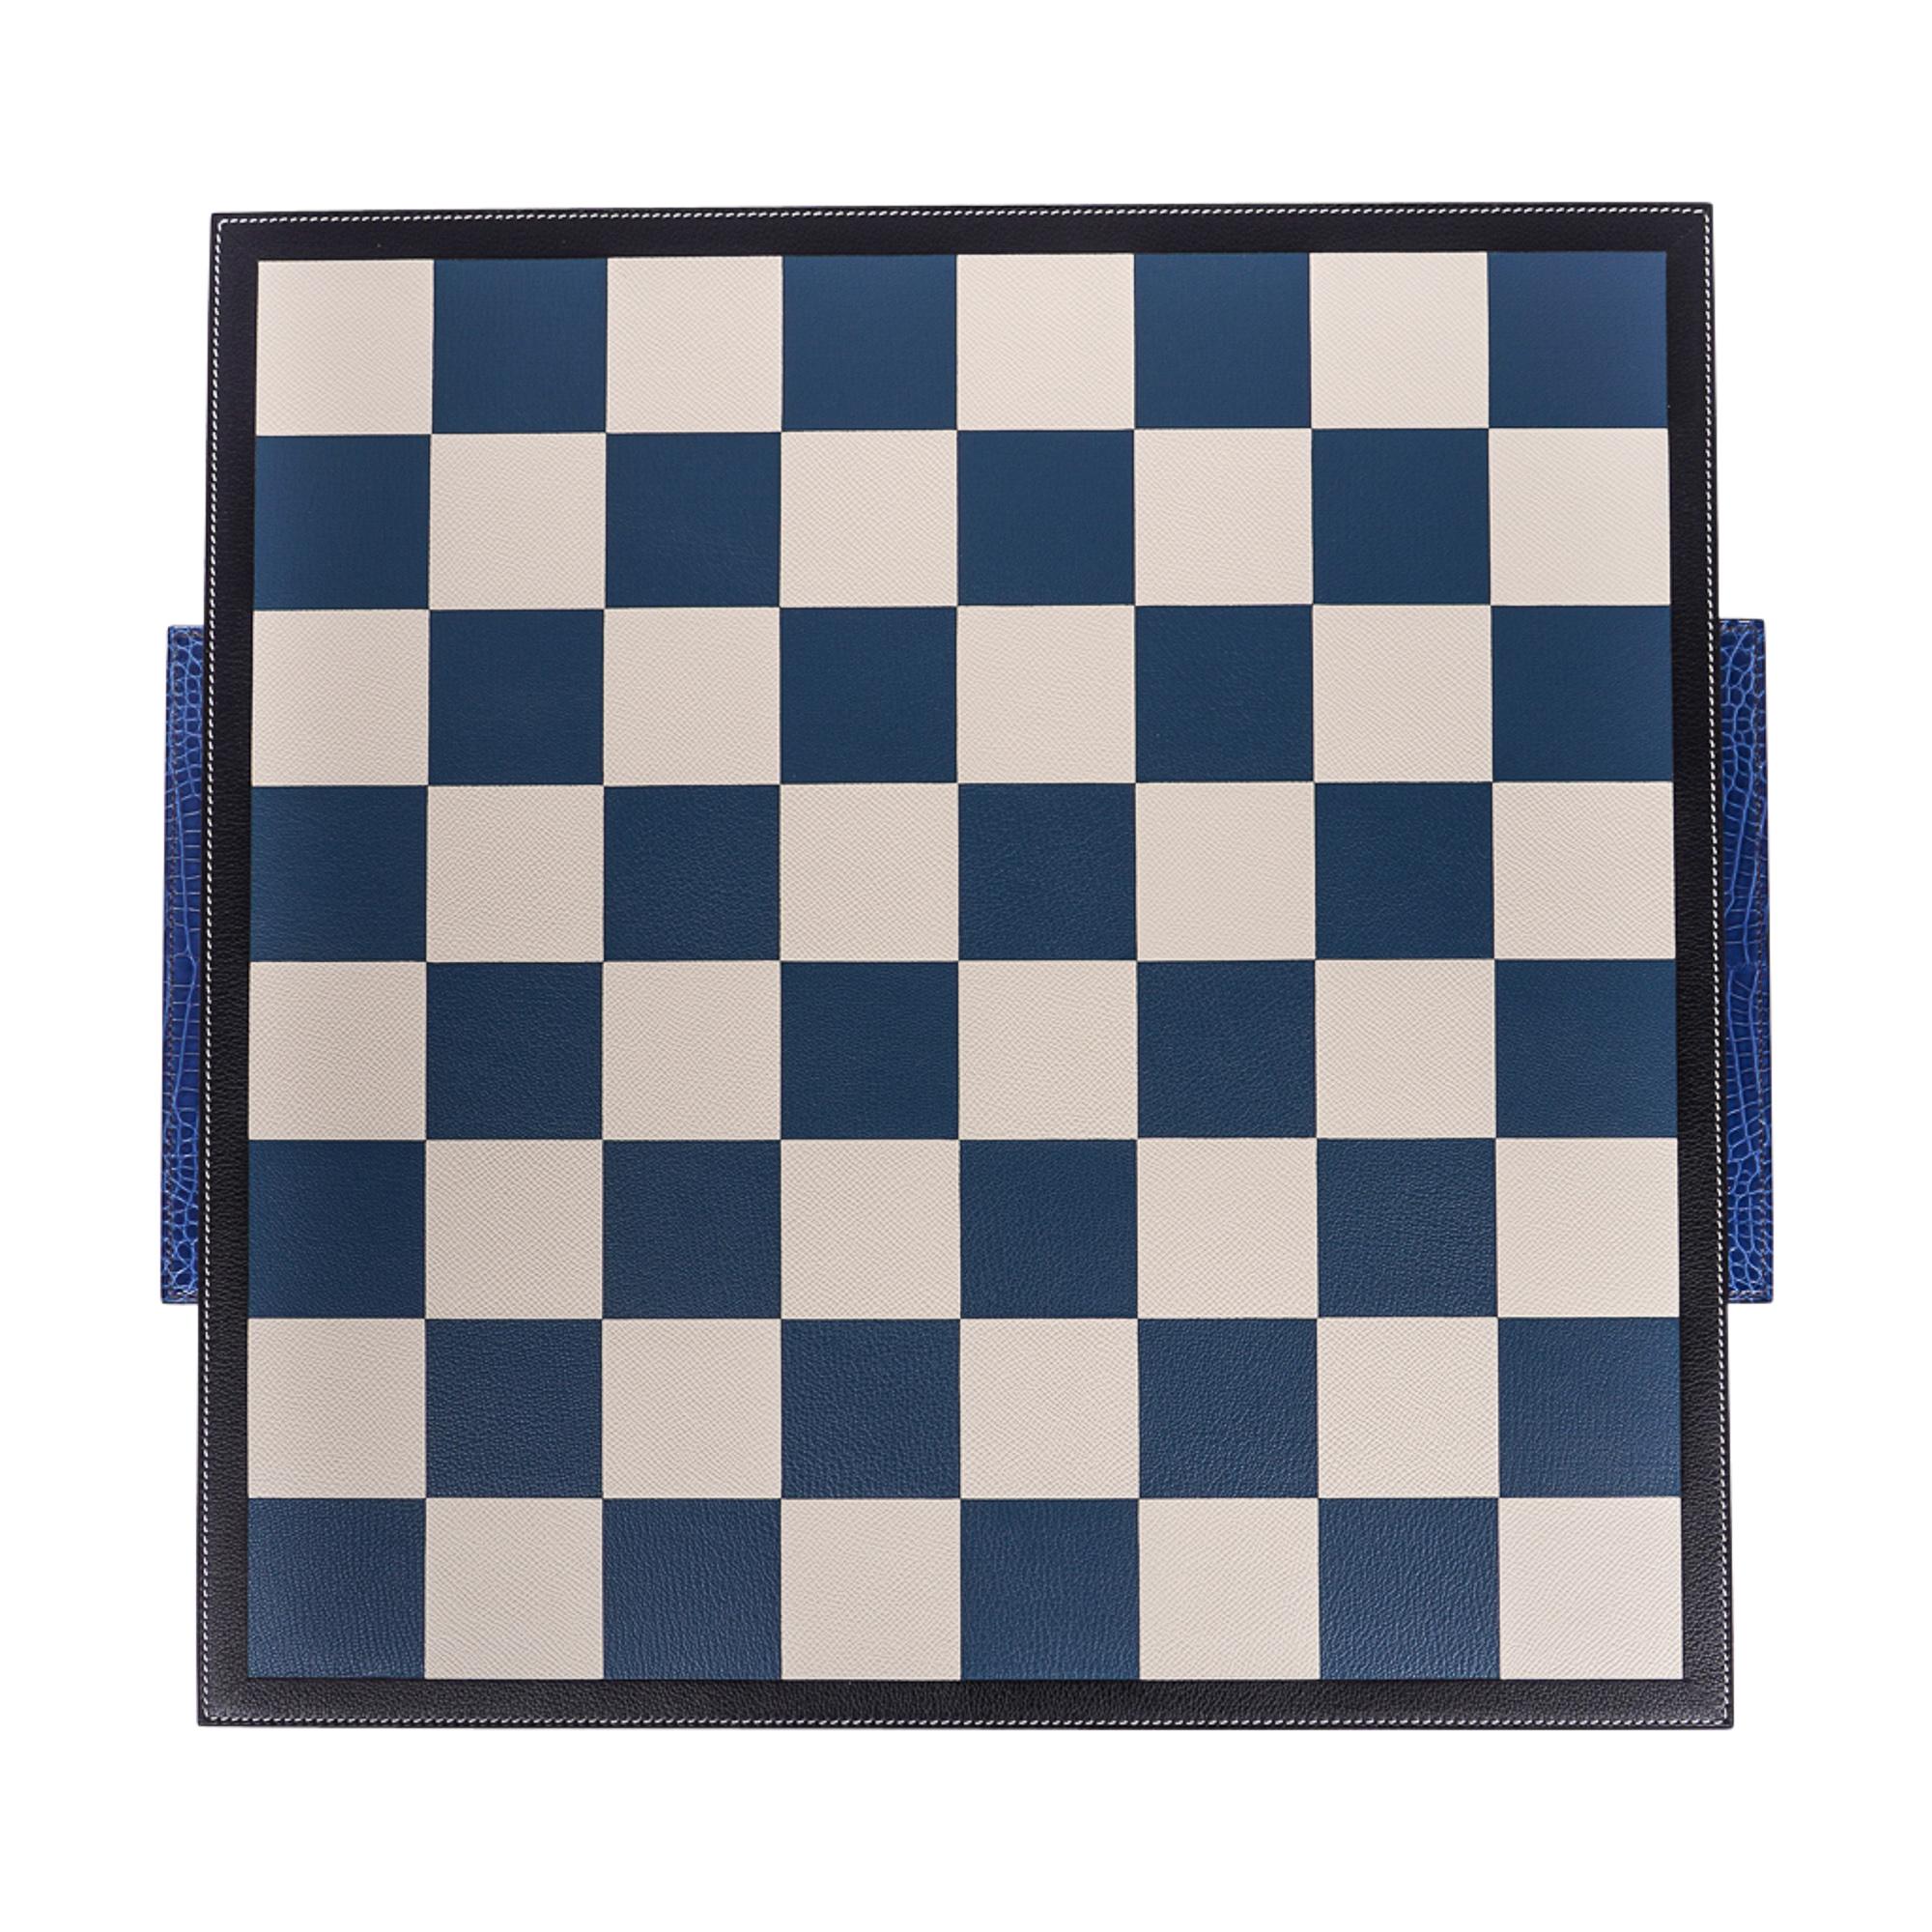 Mightychic offers an Hermes Samarcande Chess Set.
Composed of Natural Sycamore and Mahogany wood.
Beautiful contrasting wood pieces.
Gorgeous Bleu Electric Crocodile handles.
Leather covered board in Blue and cream.
Fabulous for game night parties